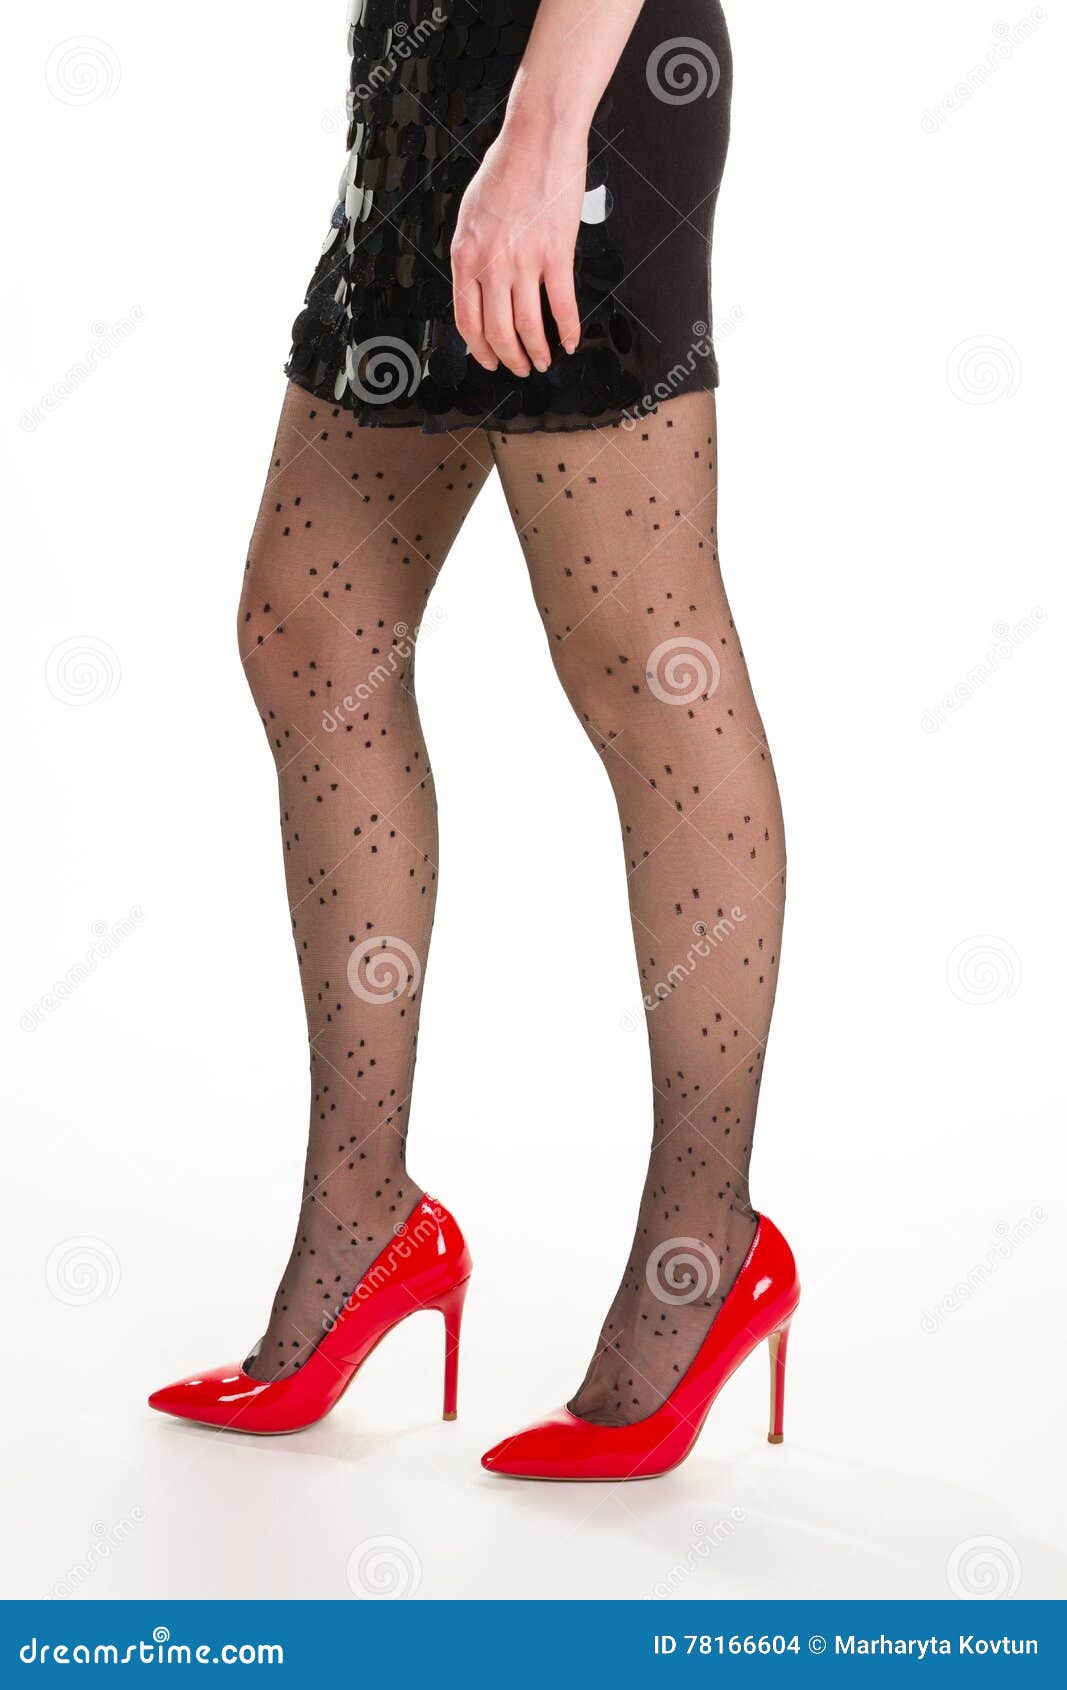 black dress with red heels images